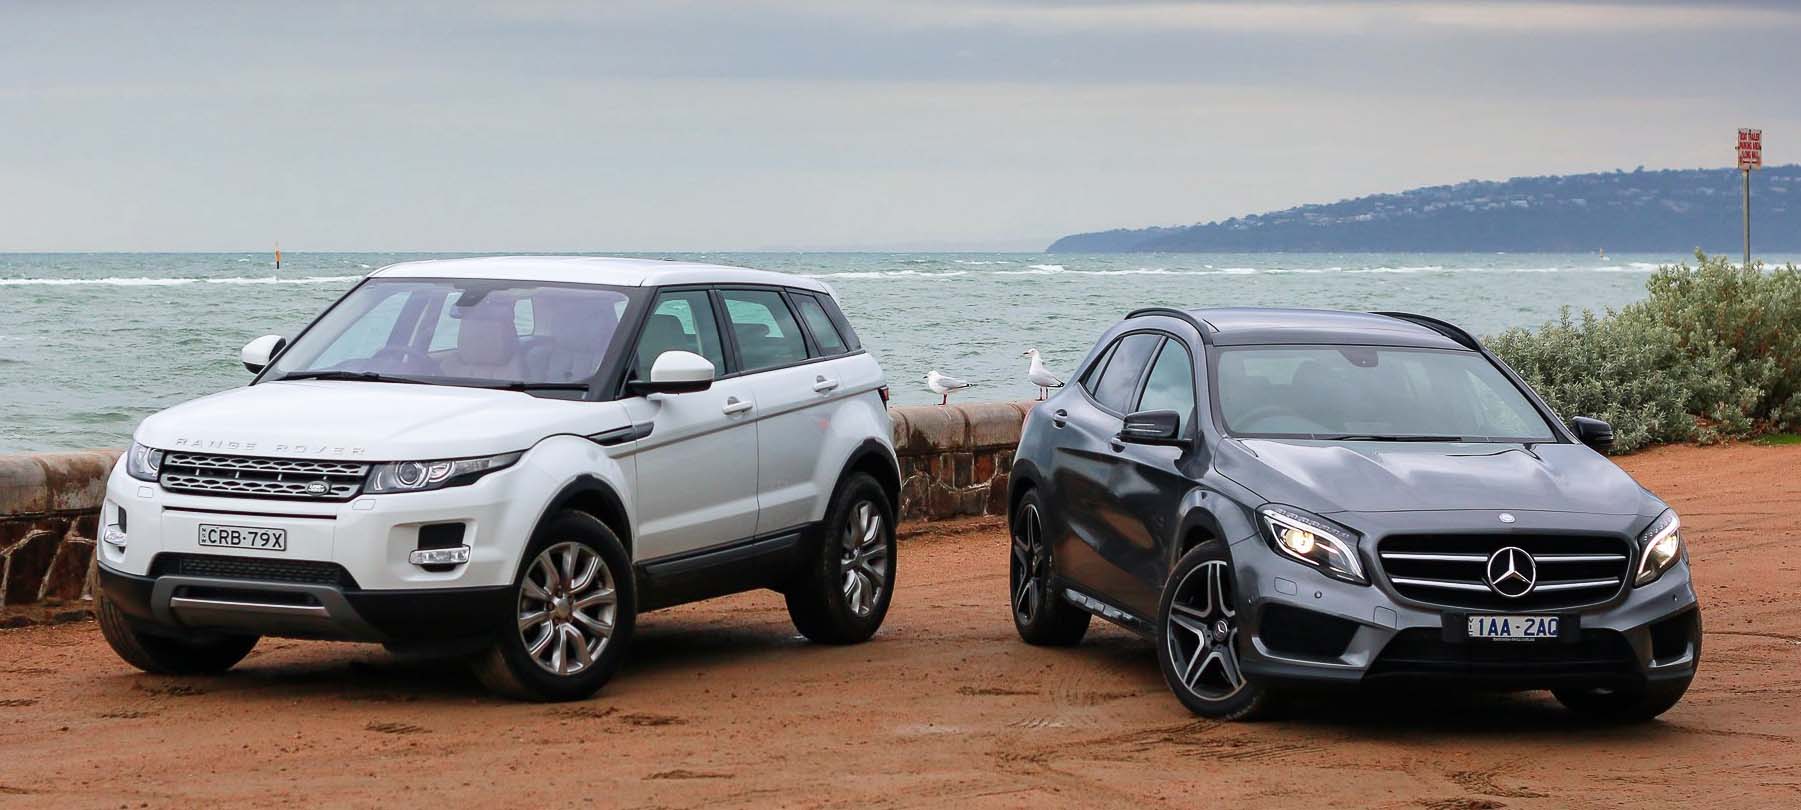 Mercedes and Range rover